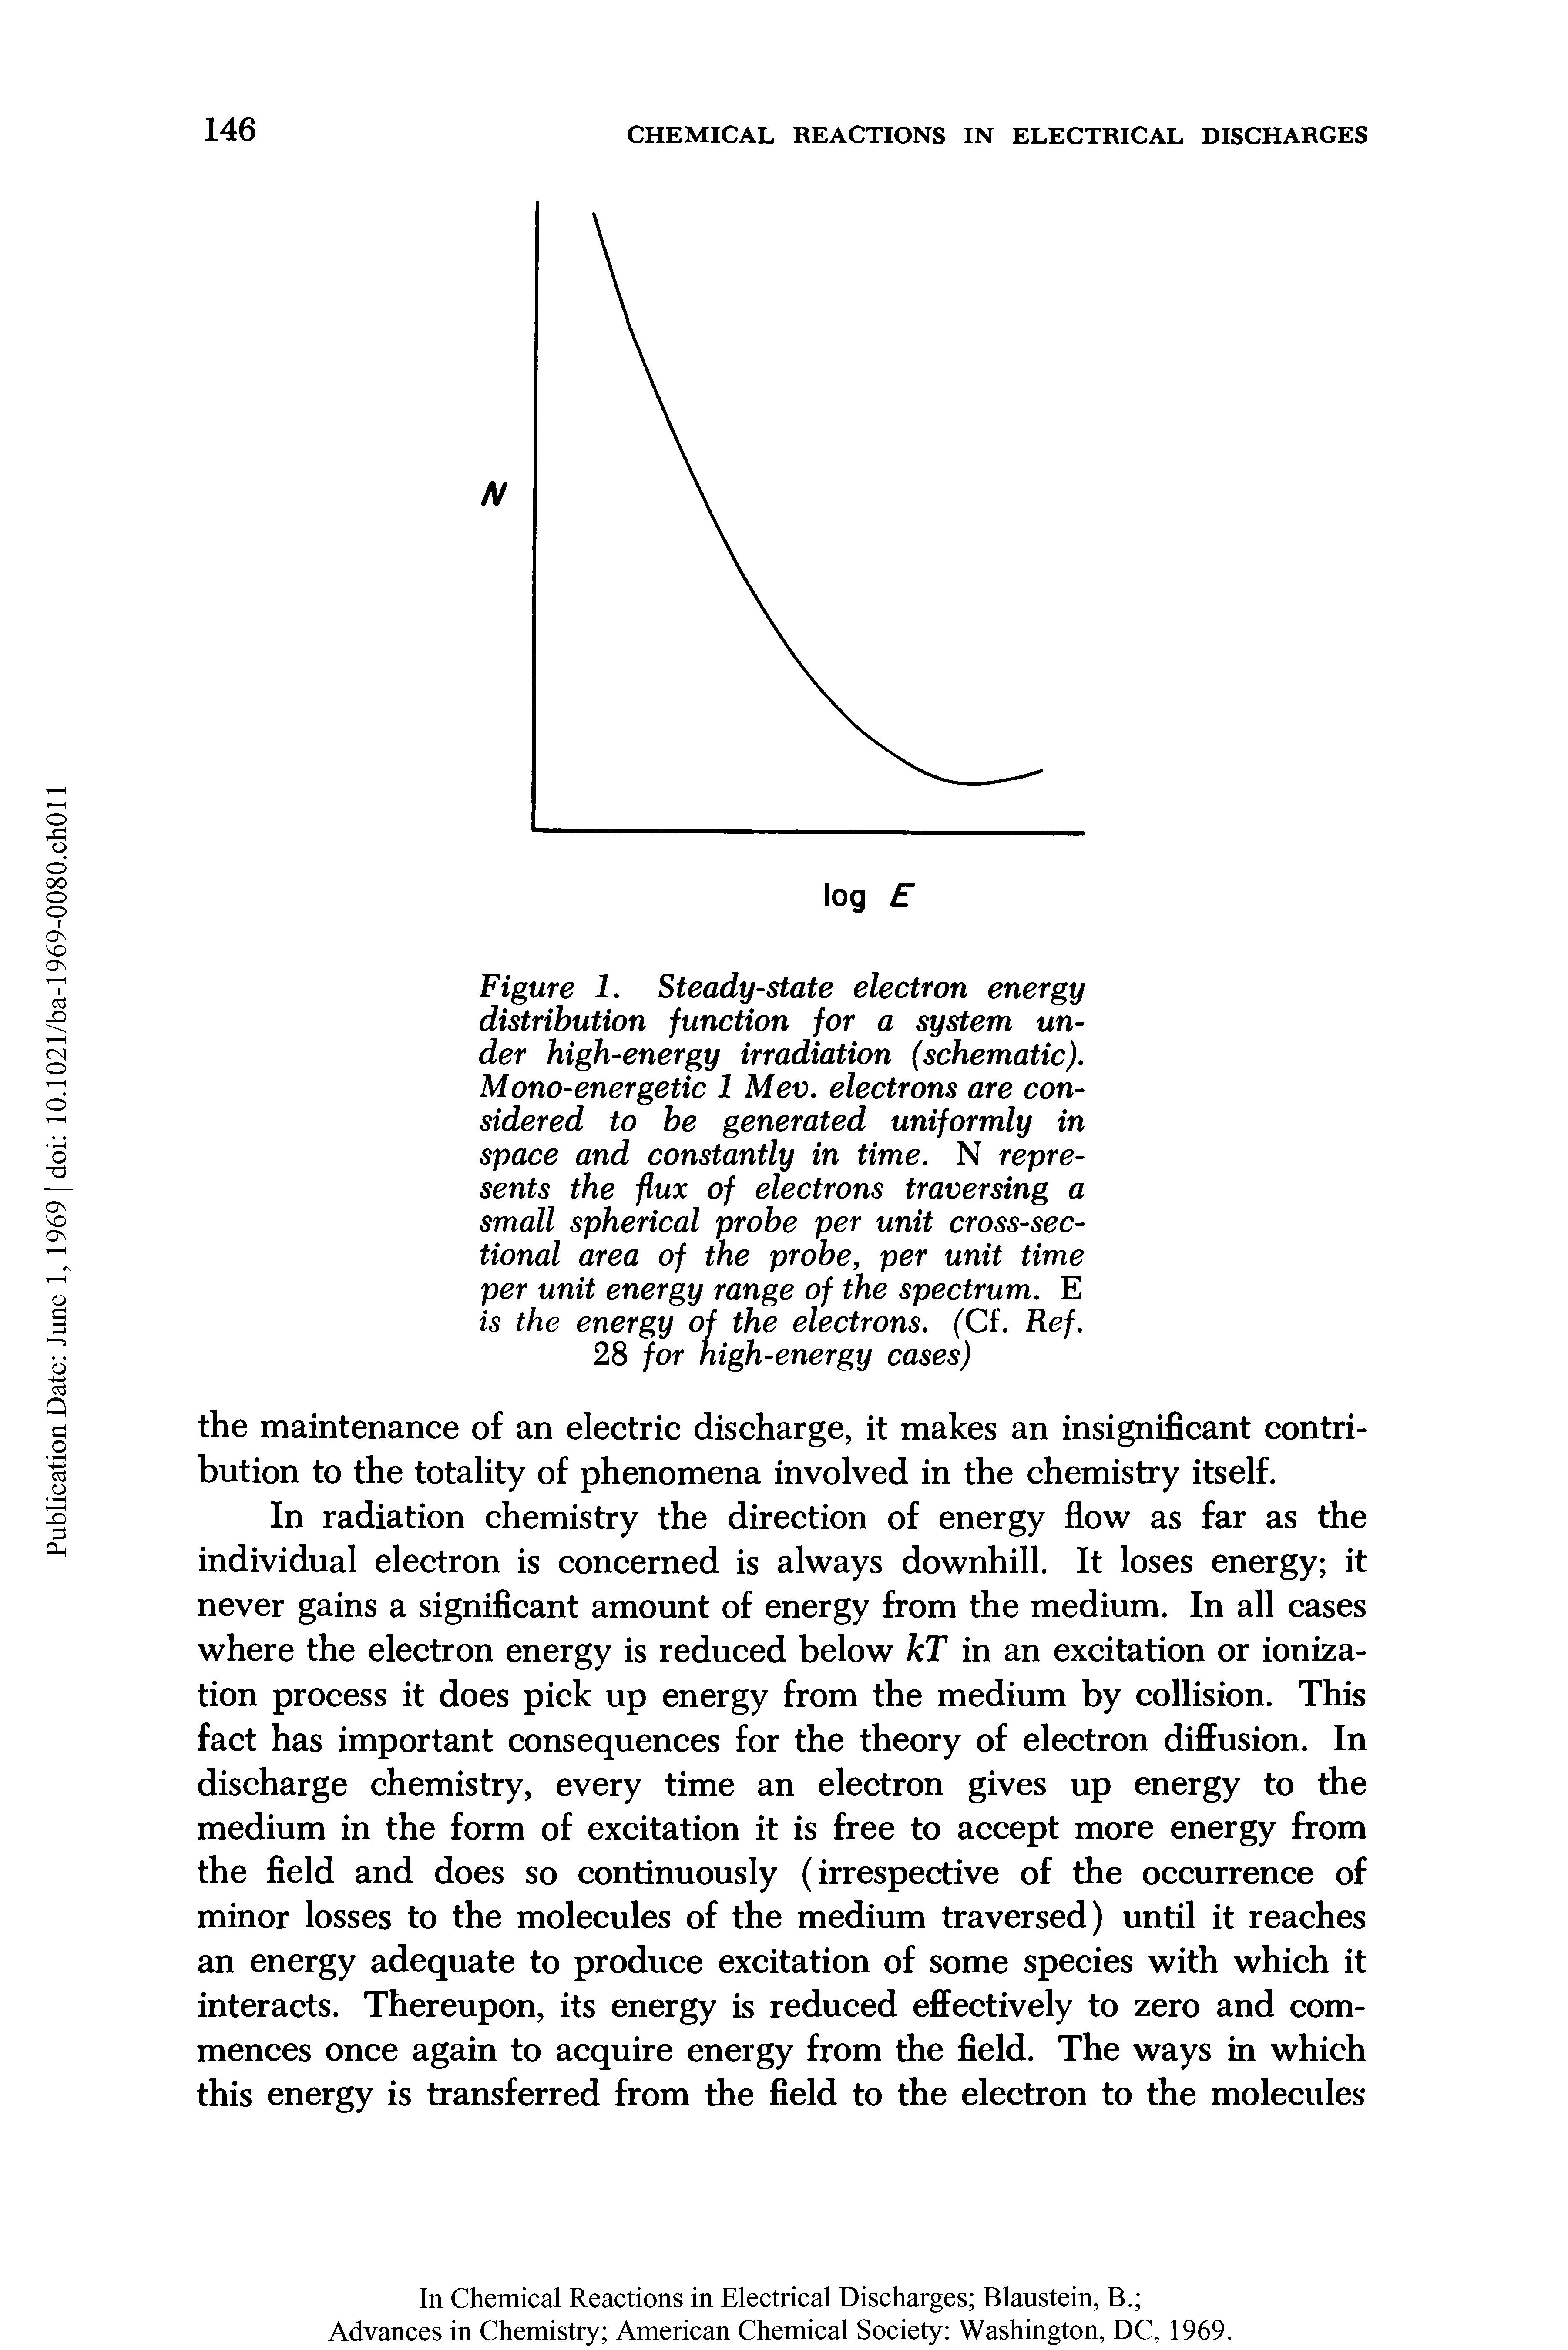 Figure 1. Steady-state electron energy distribution function for a system under high-energy irradiation (schematic).